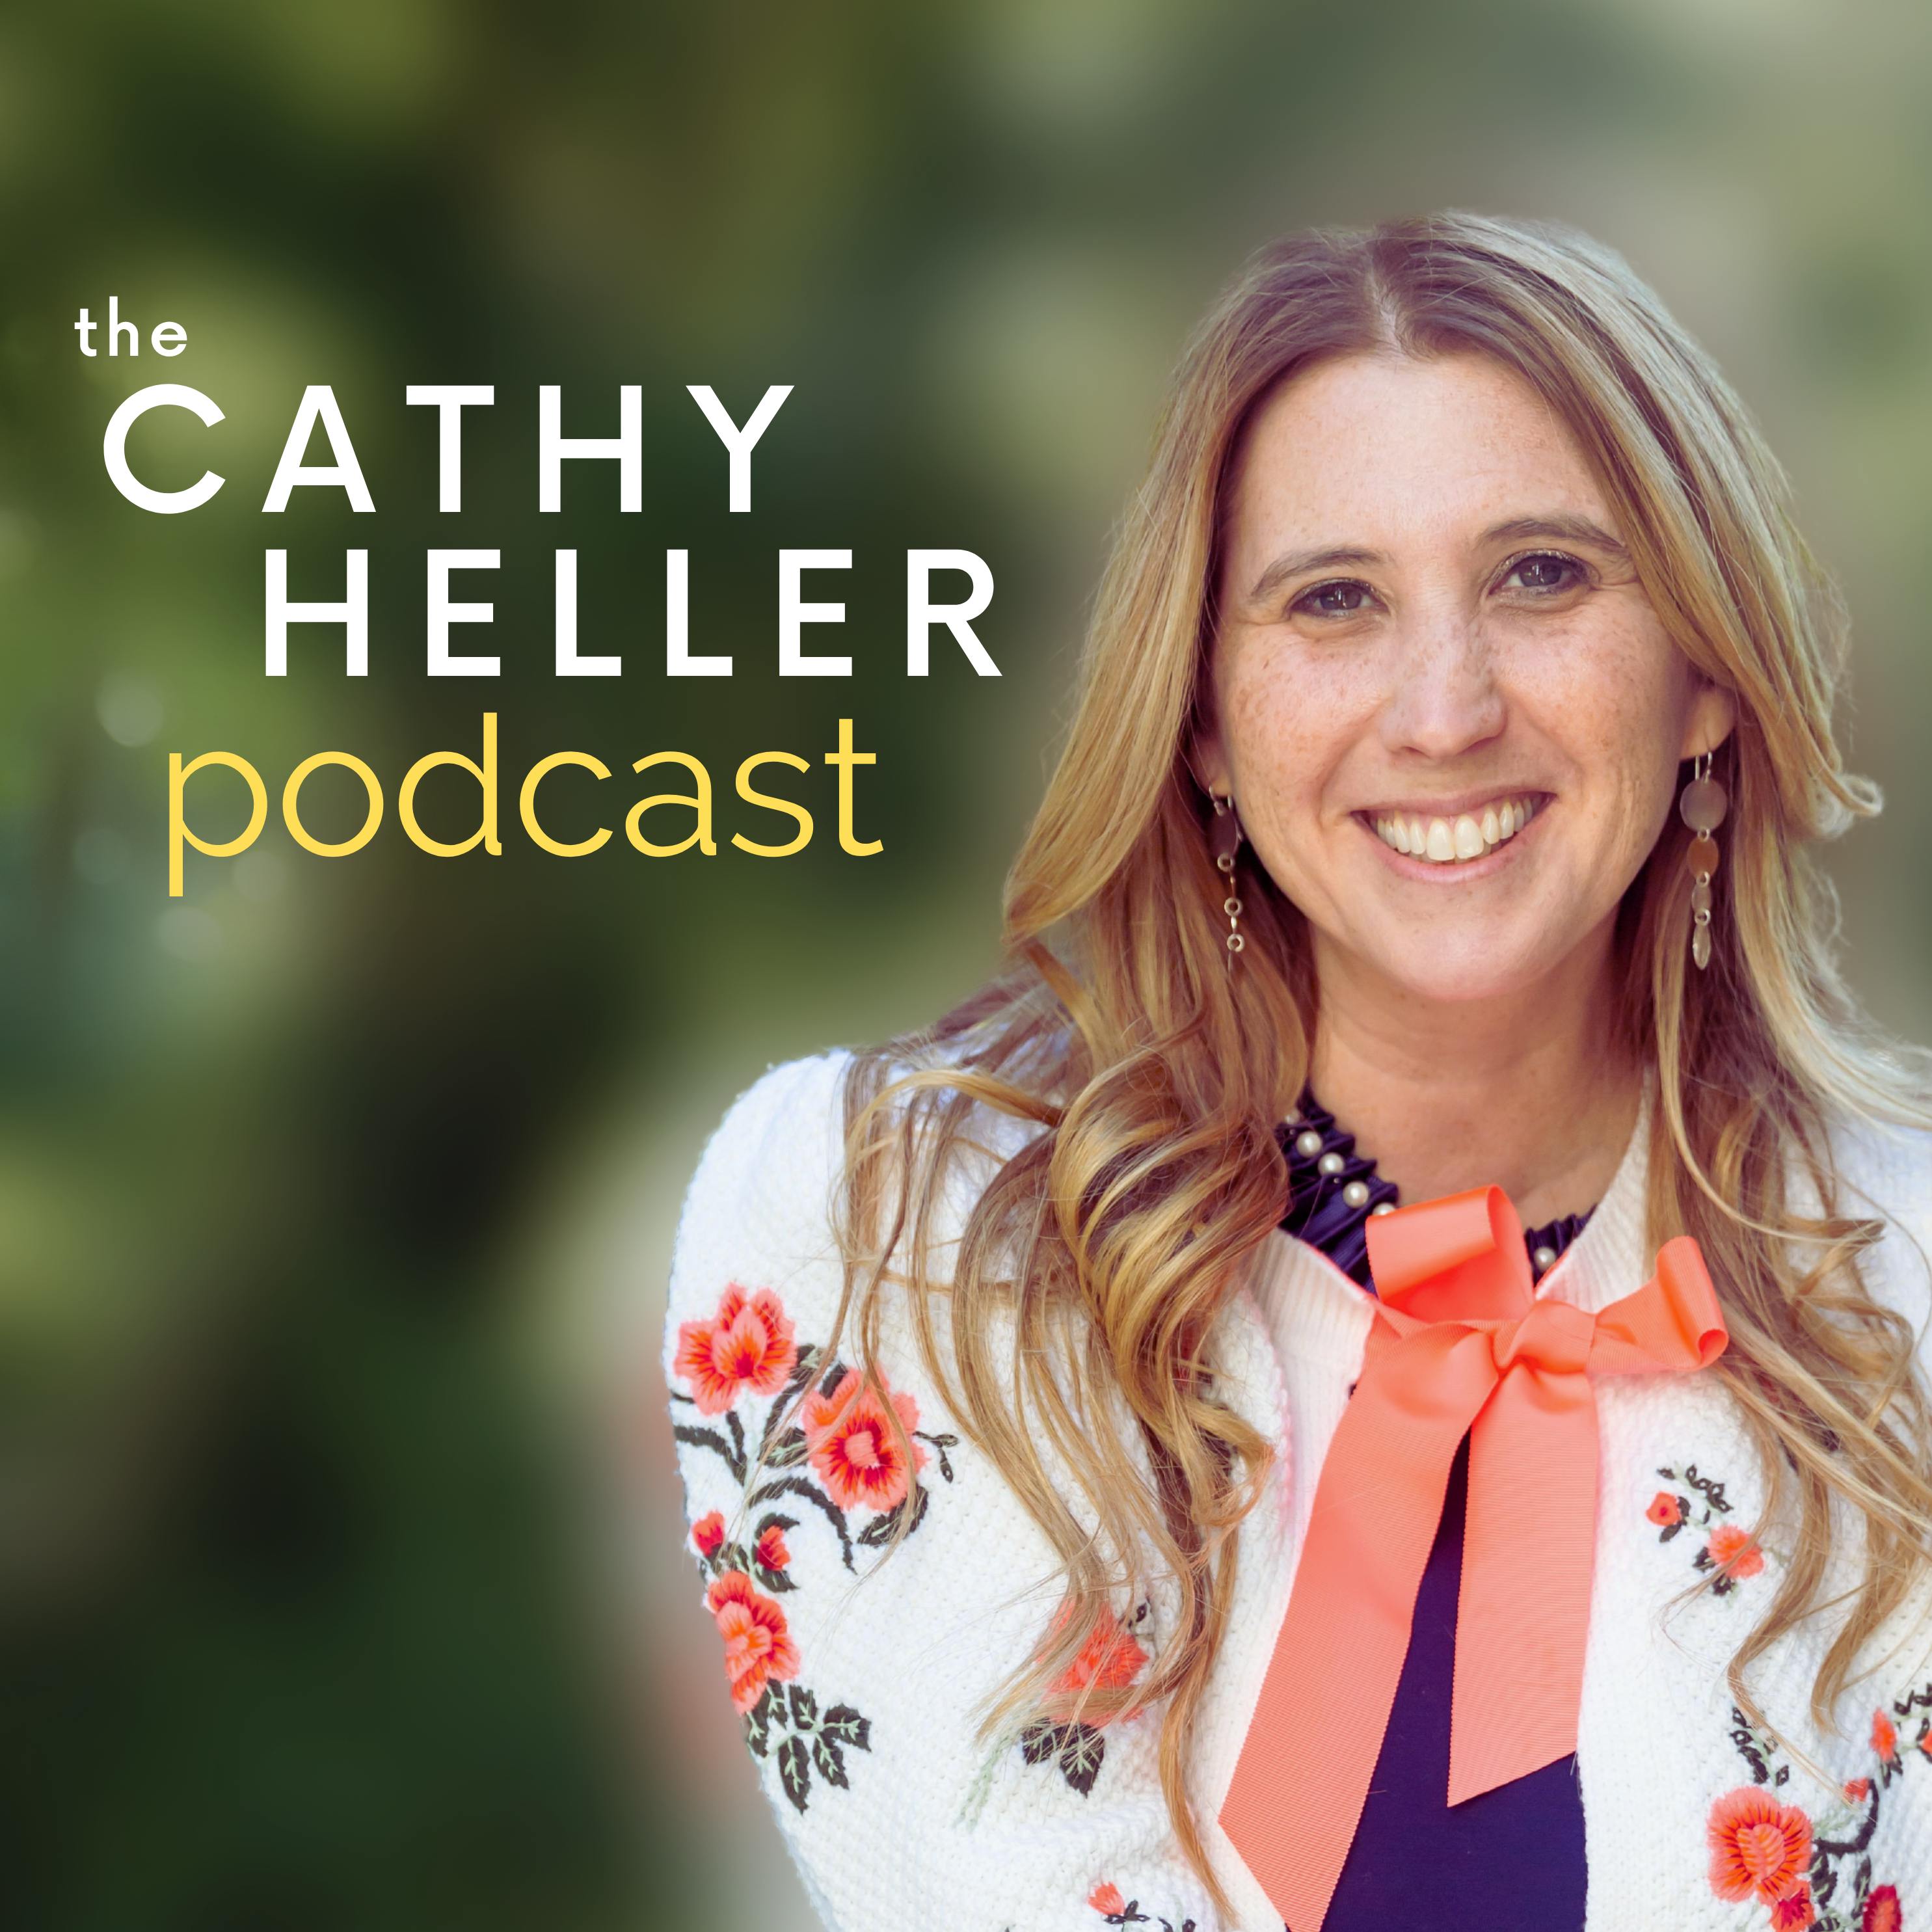 The Cathy Heller Podcast podcast show image